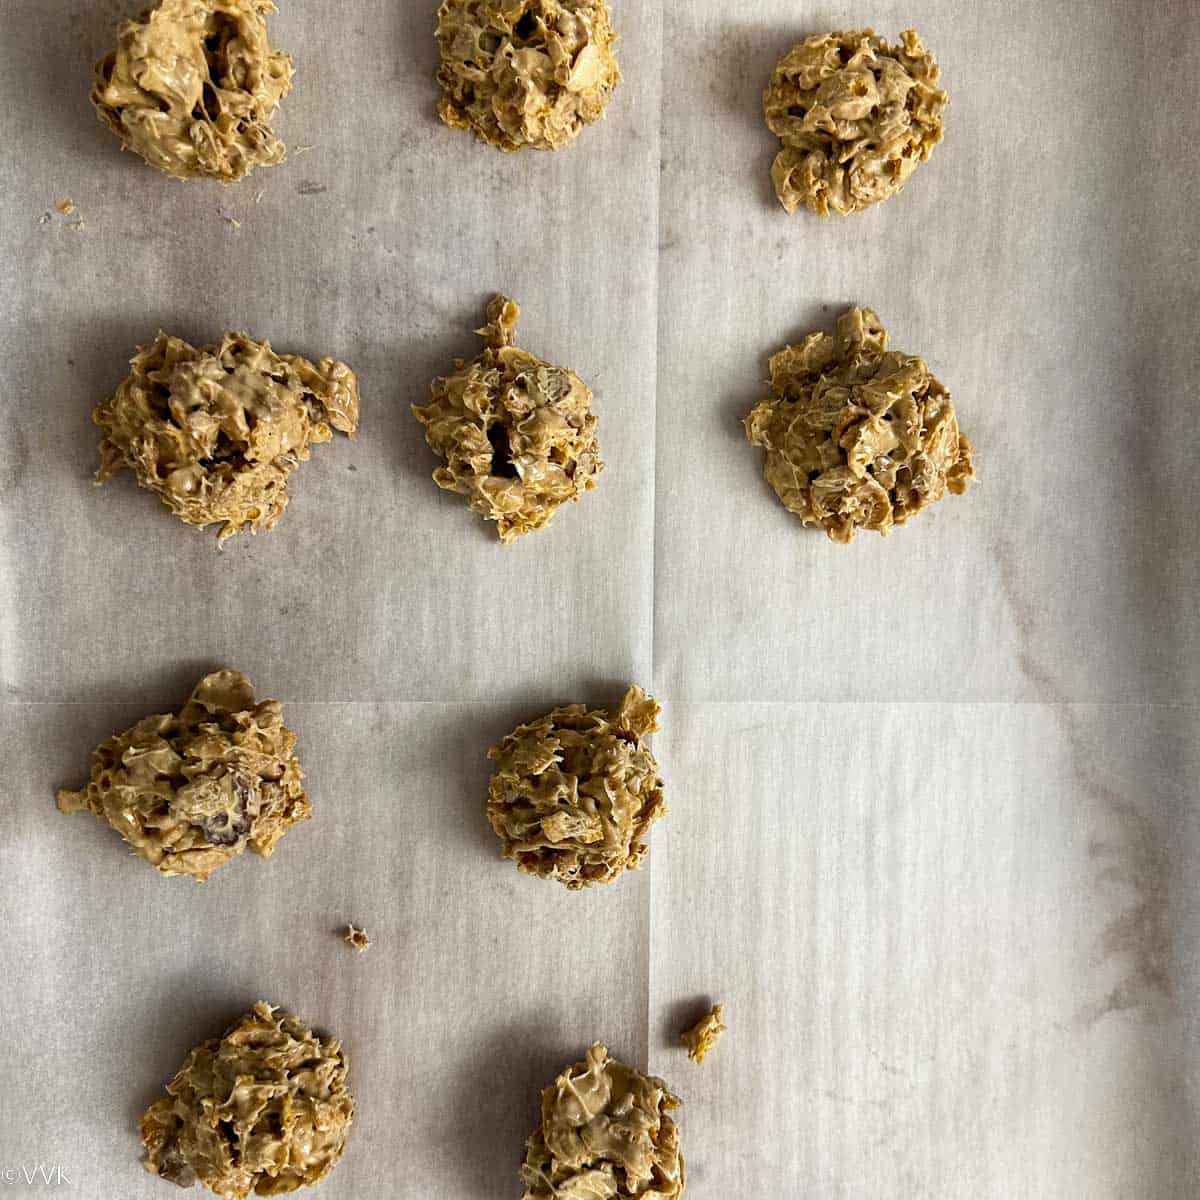 placing the clusters on the baking tray